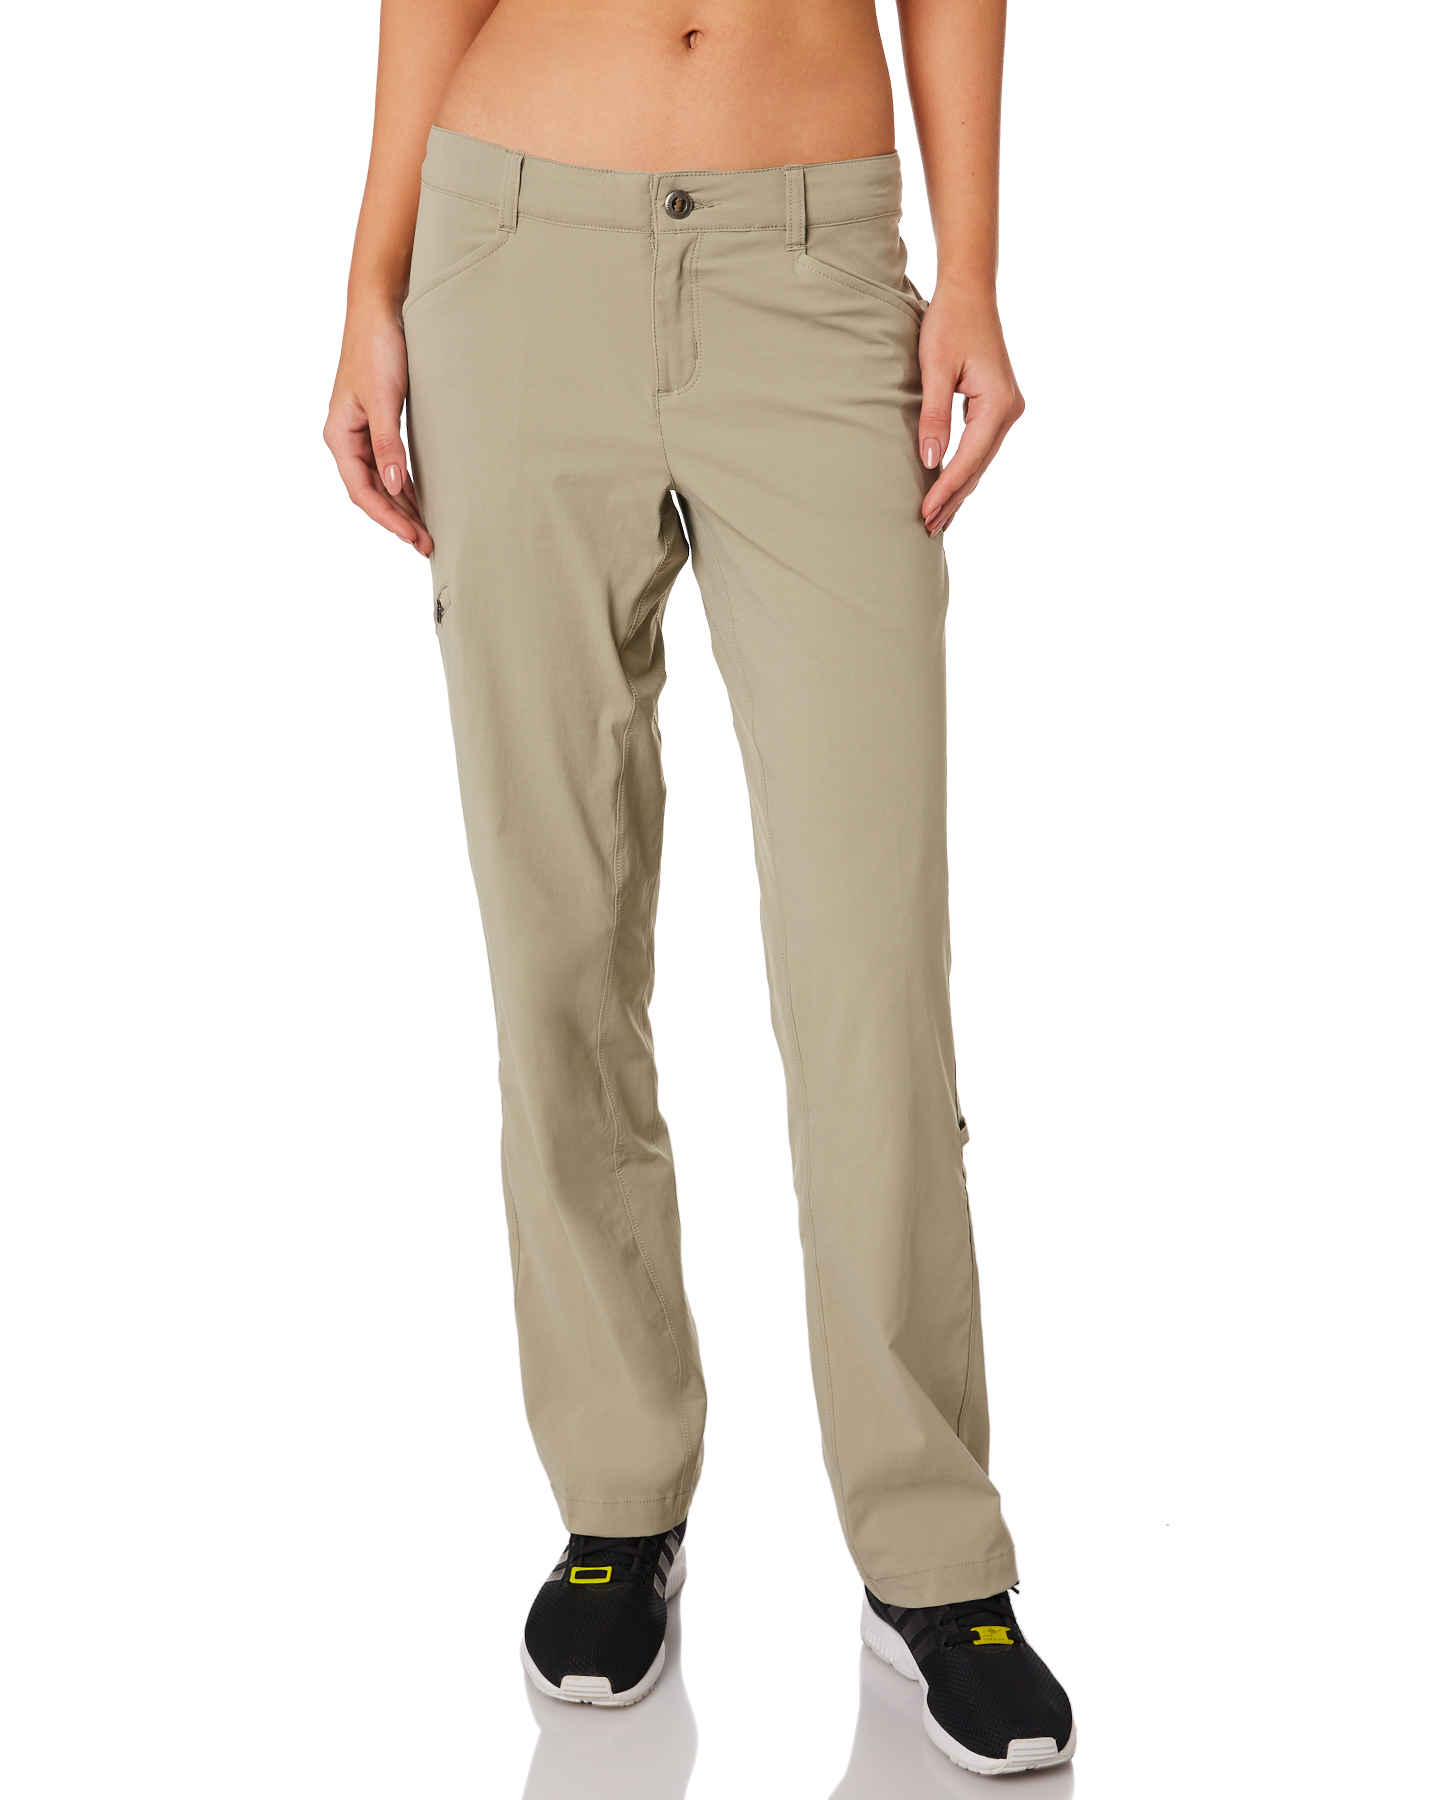 Patagonia Womens Quandary Pants - Shale | SurfStitch